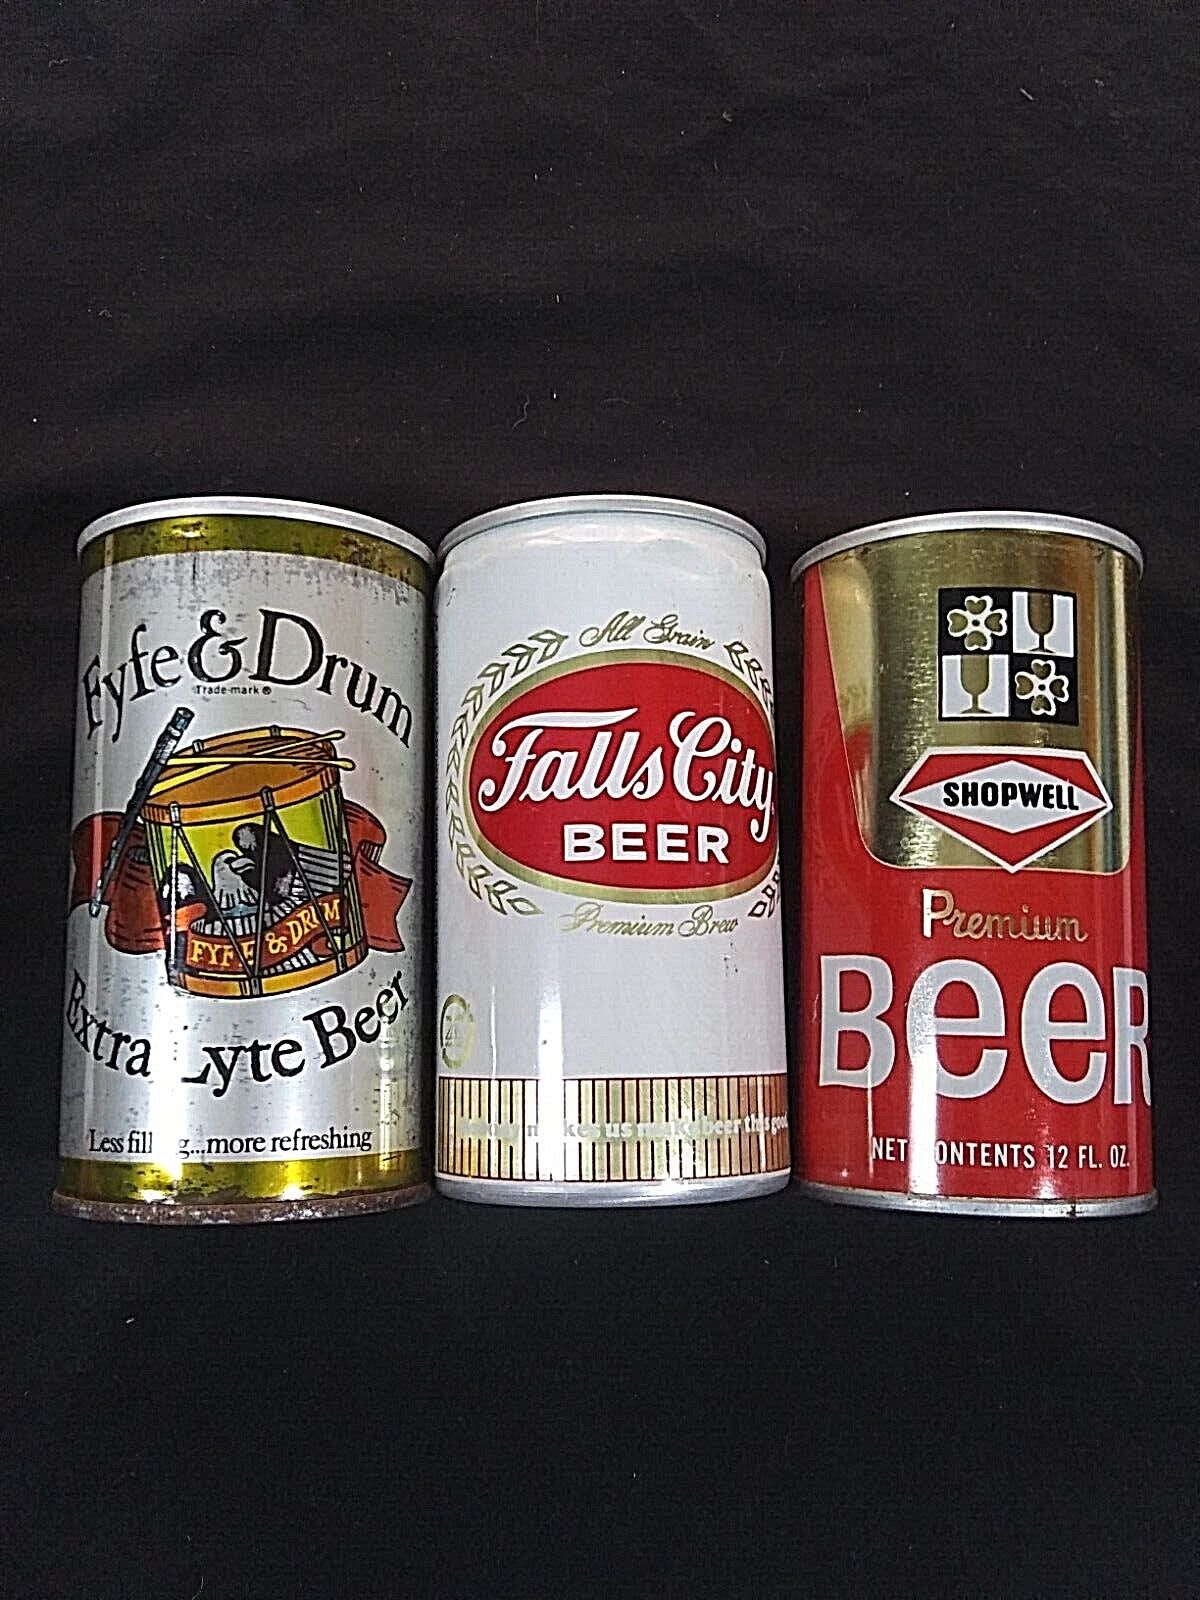 Vintage Fyfe & Drum & Falls City & Shopwell Beer Cans